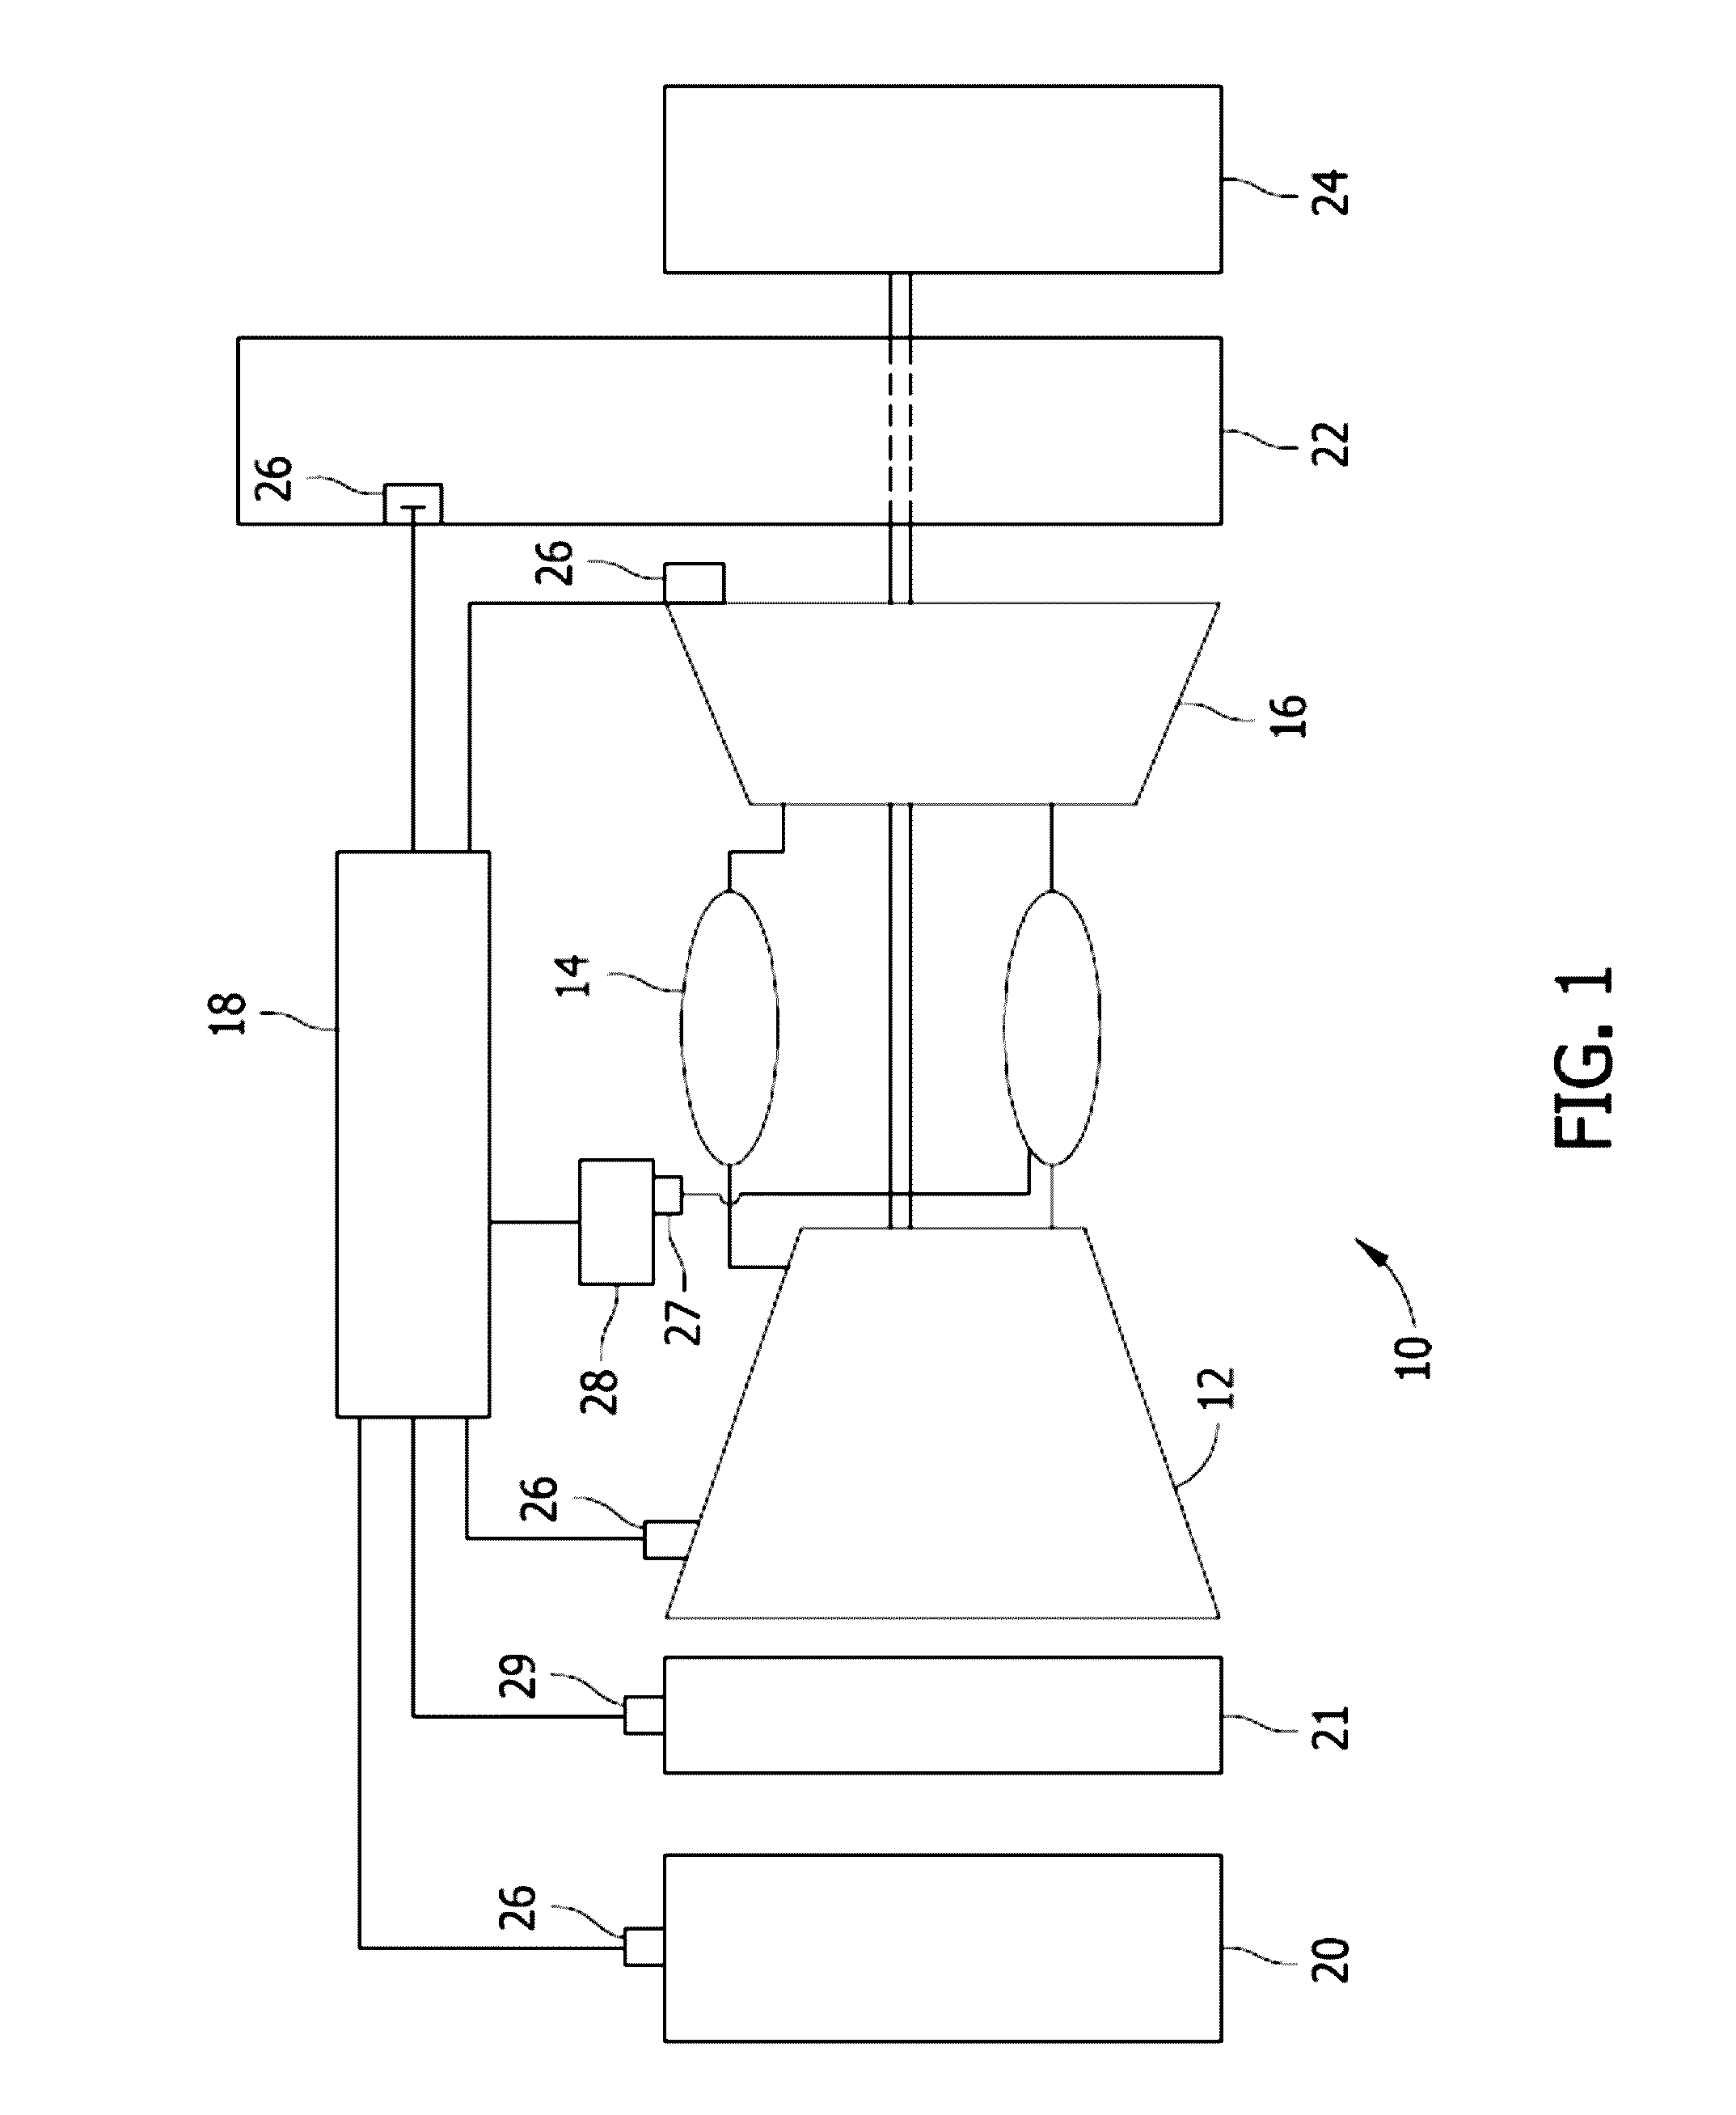 Application of probabilistic control in gas turbine tuning for emissions-exhaust energy parameters, related control systems, computer program products and methods